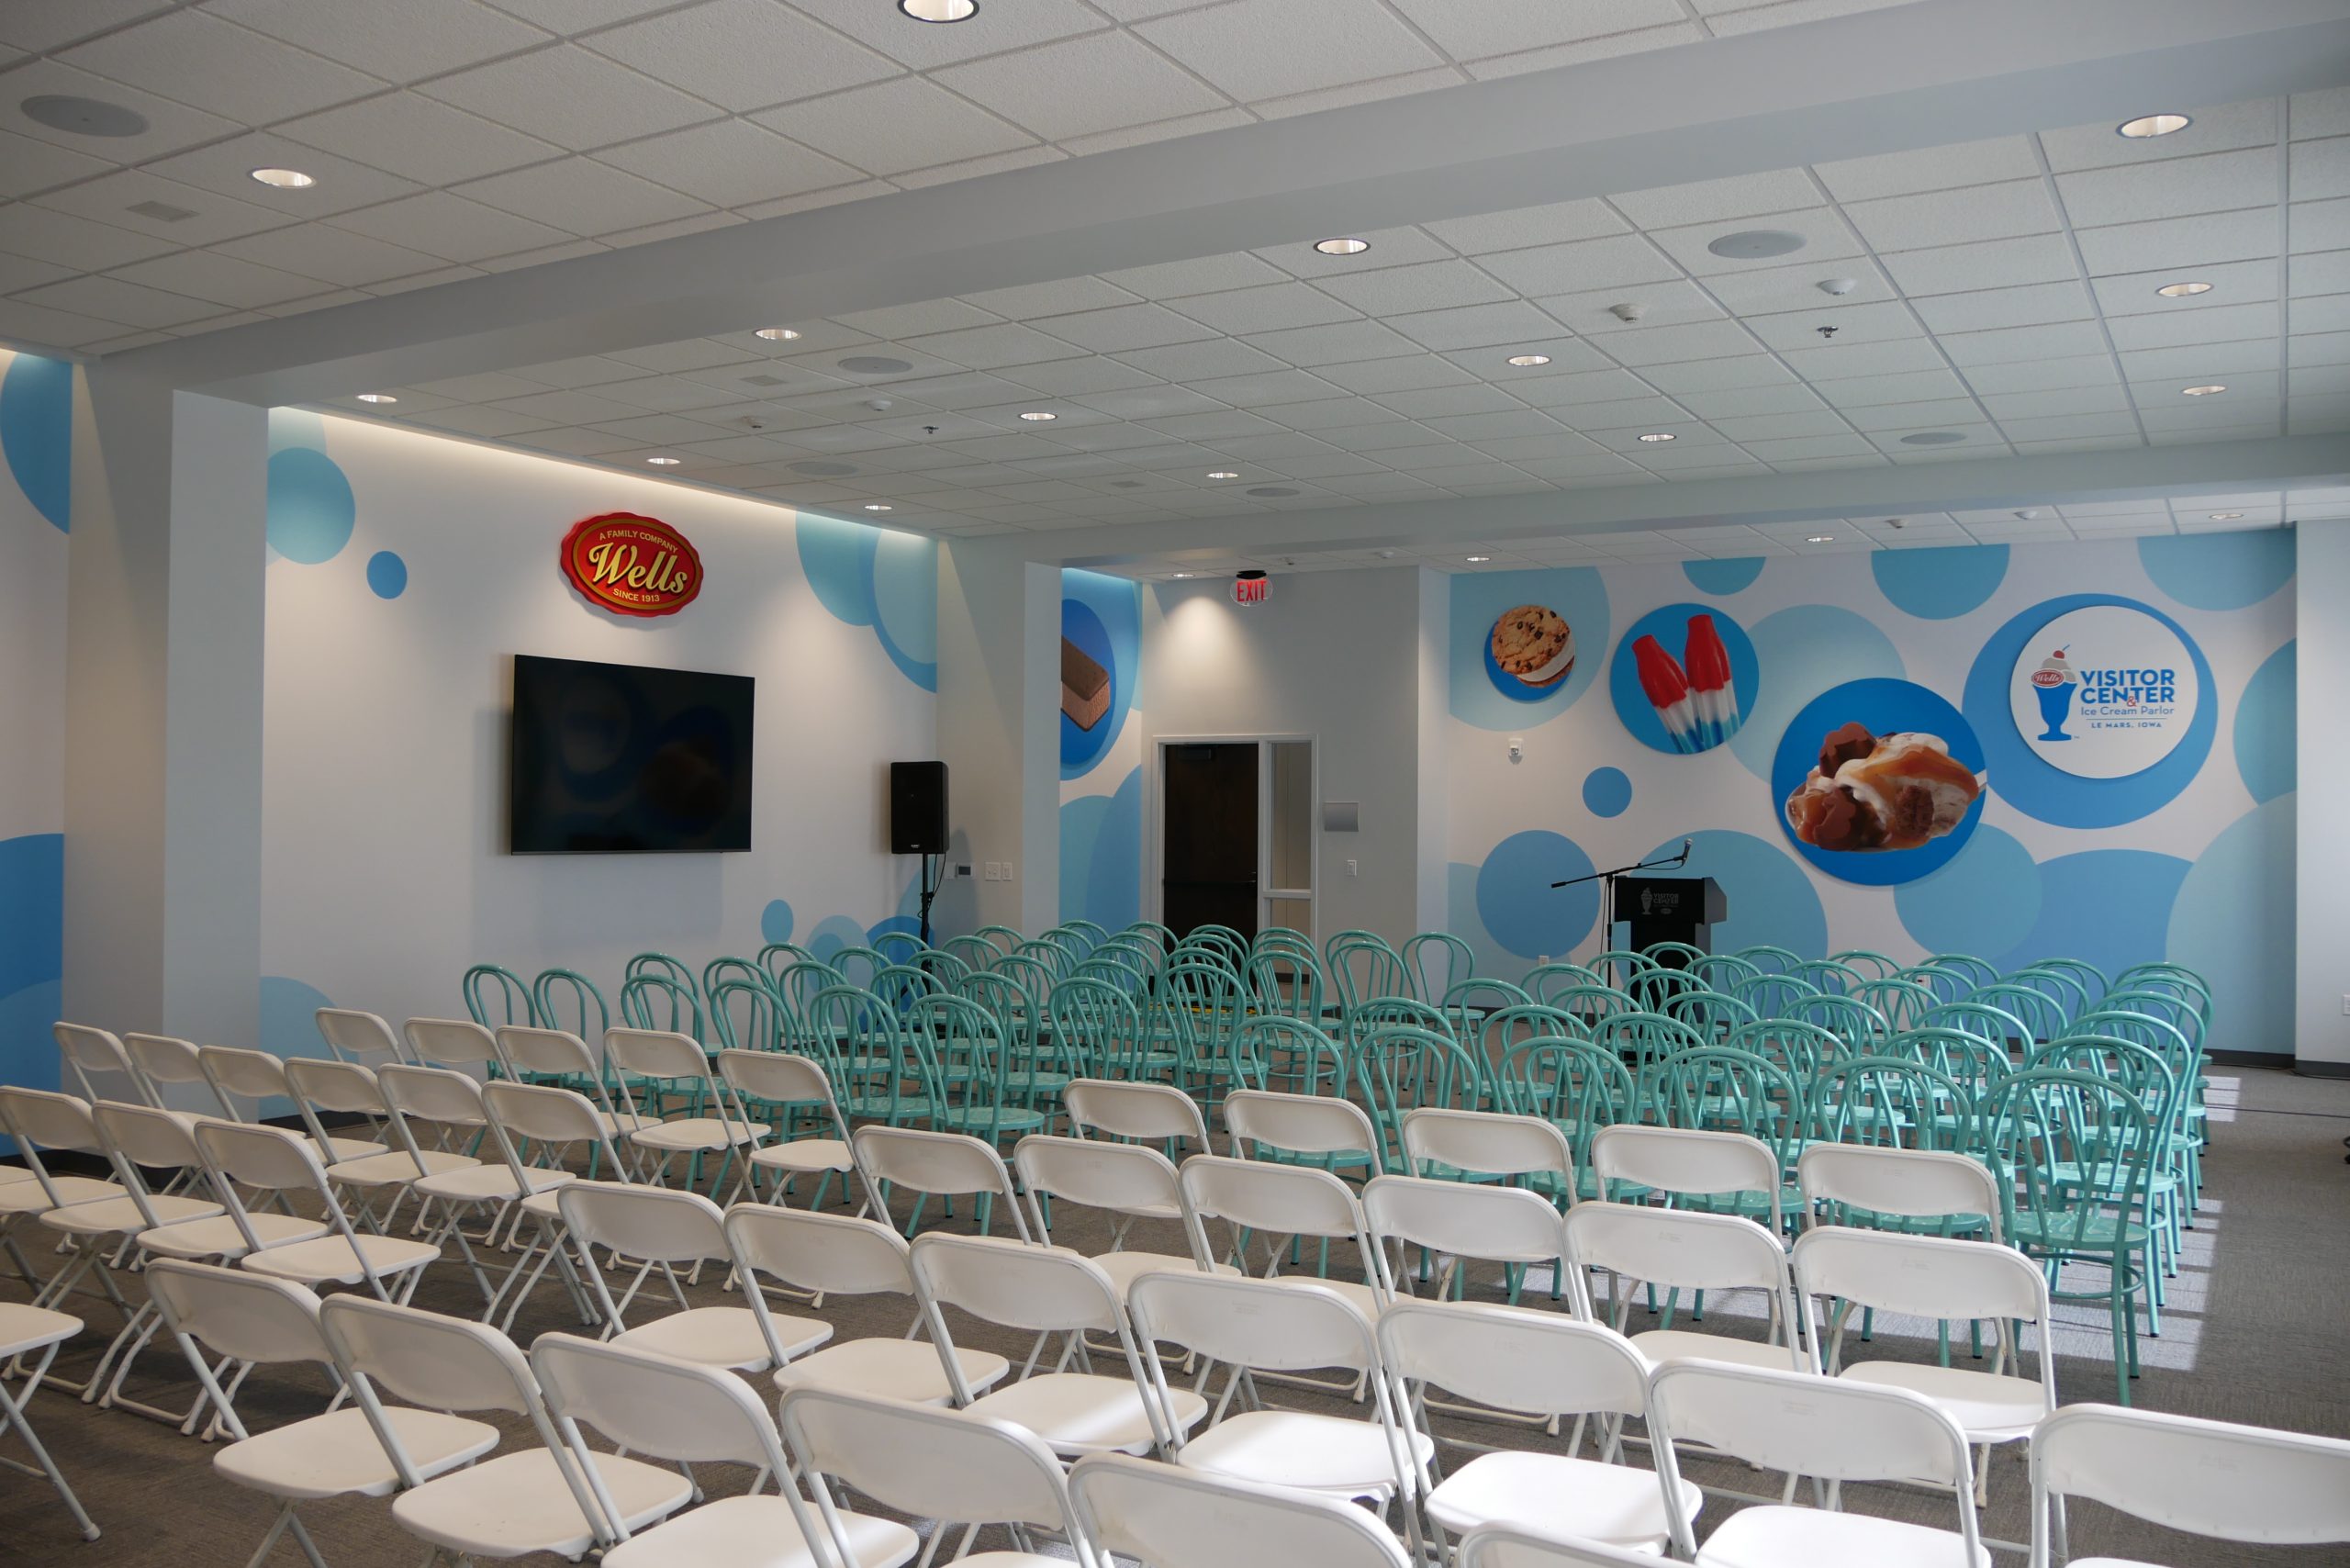 Lareg event space with seating, a podium wall monitors and wall graphics